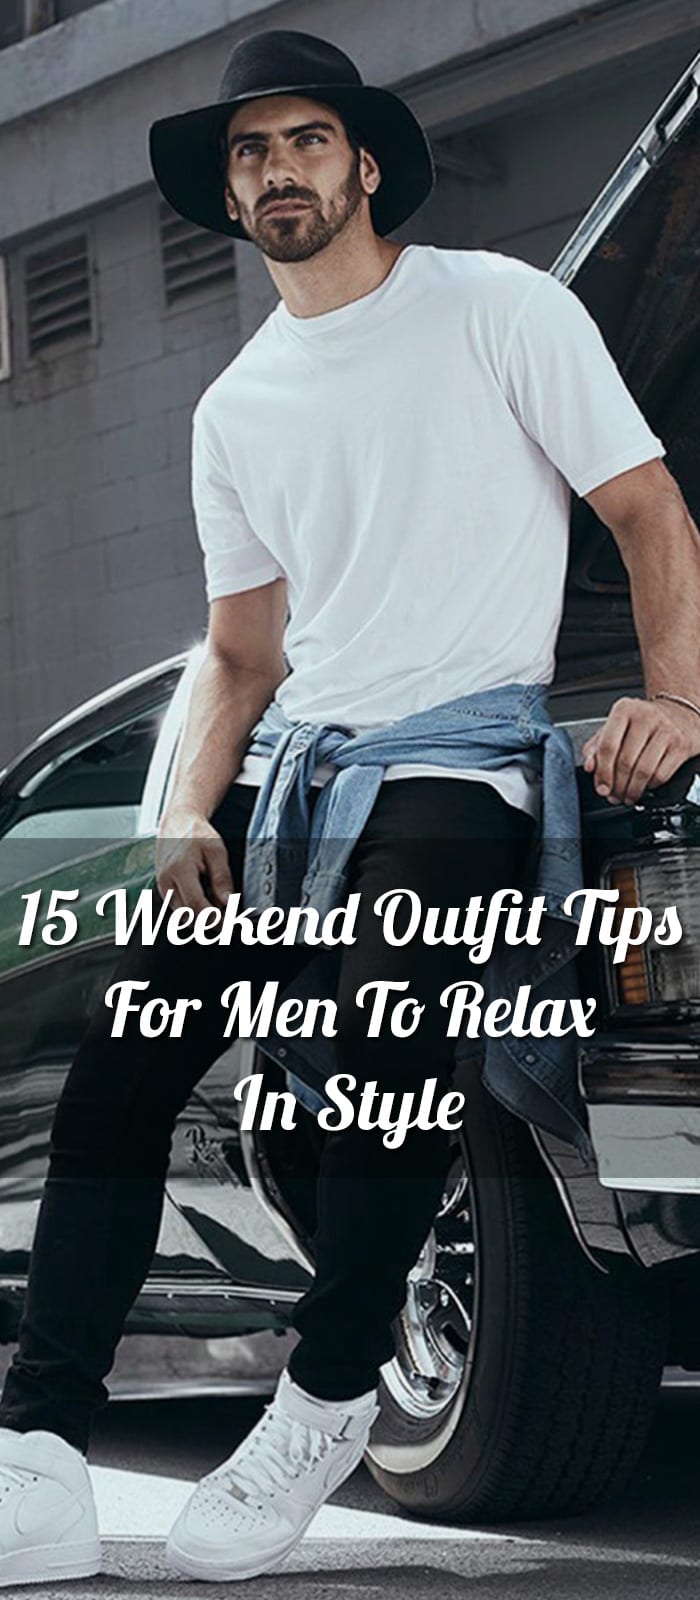 15-Weekend-Outfit-Tips-For-Men-To-Relax-In-Style